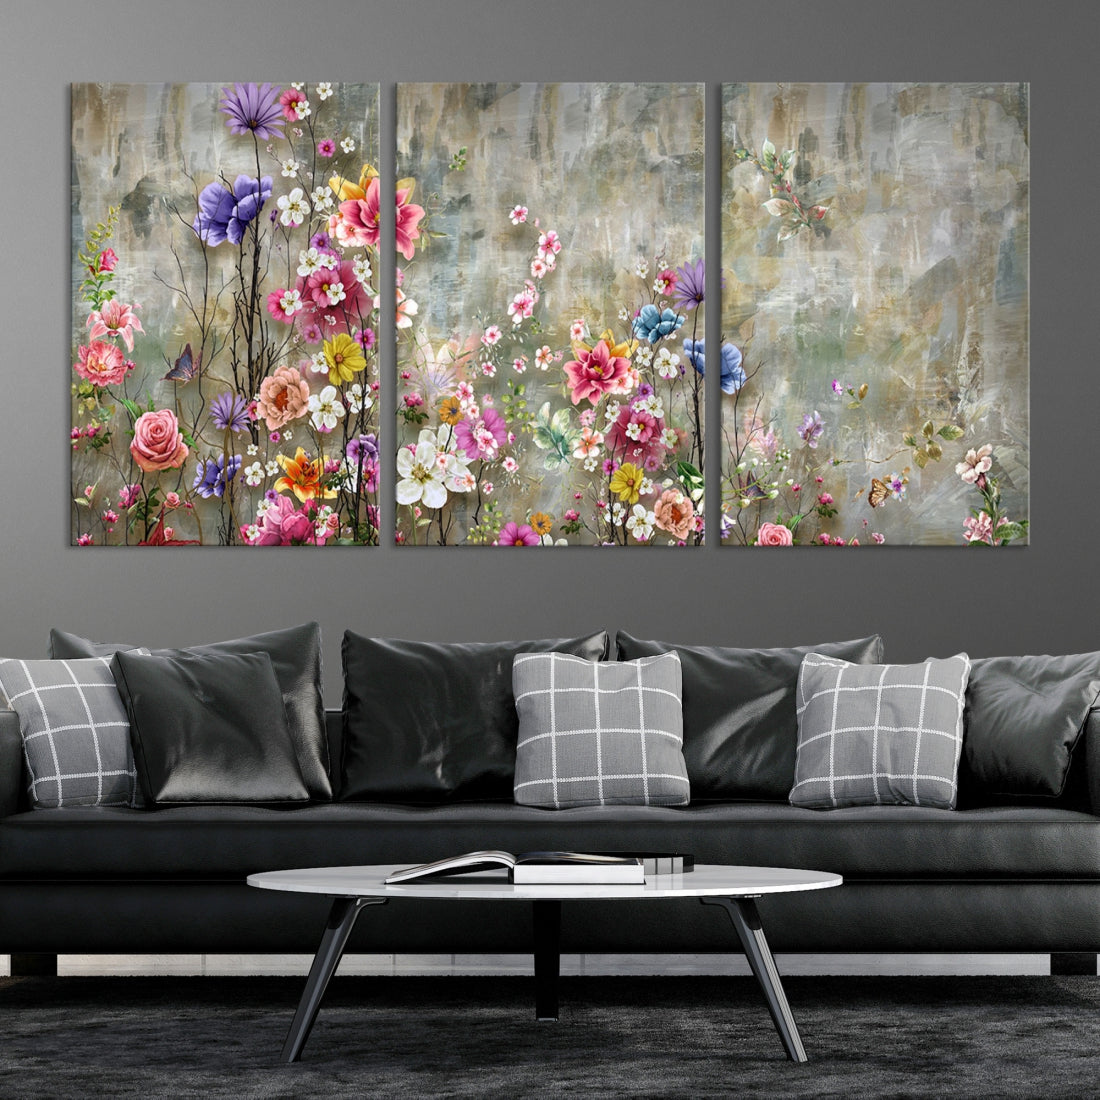 Cheering Flowers Painting on Canvas Print Extra Large Wall Art Floral Wall Decor